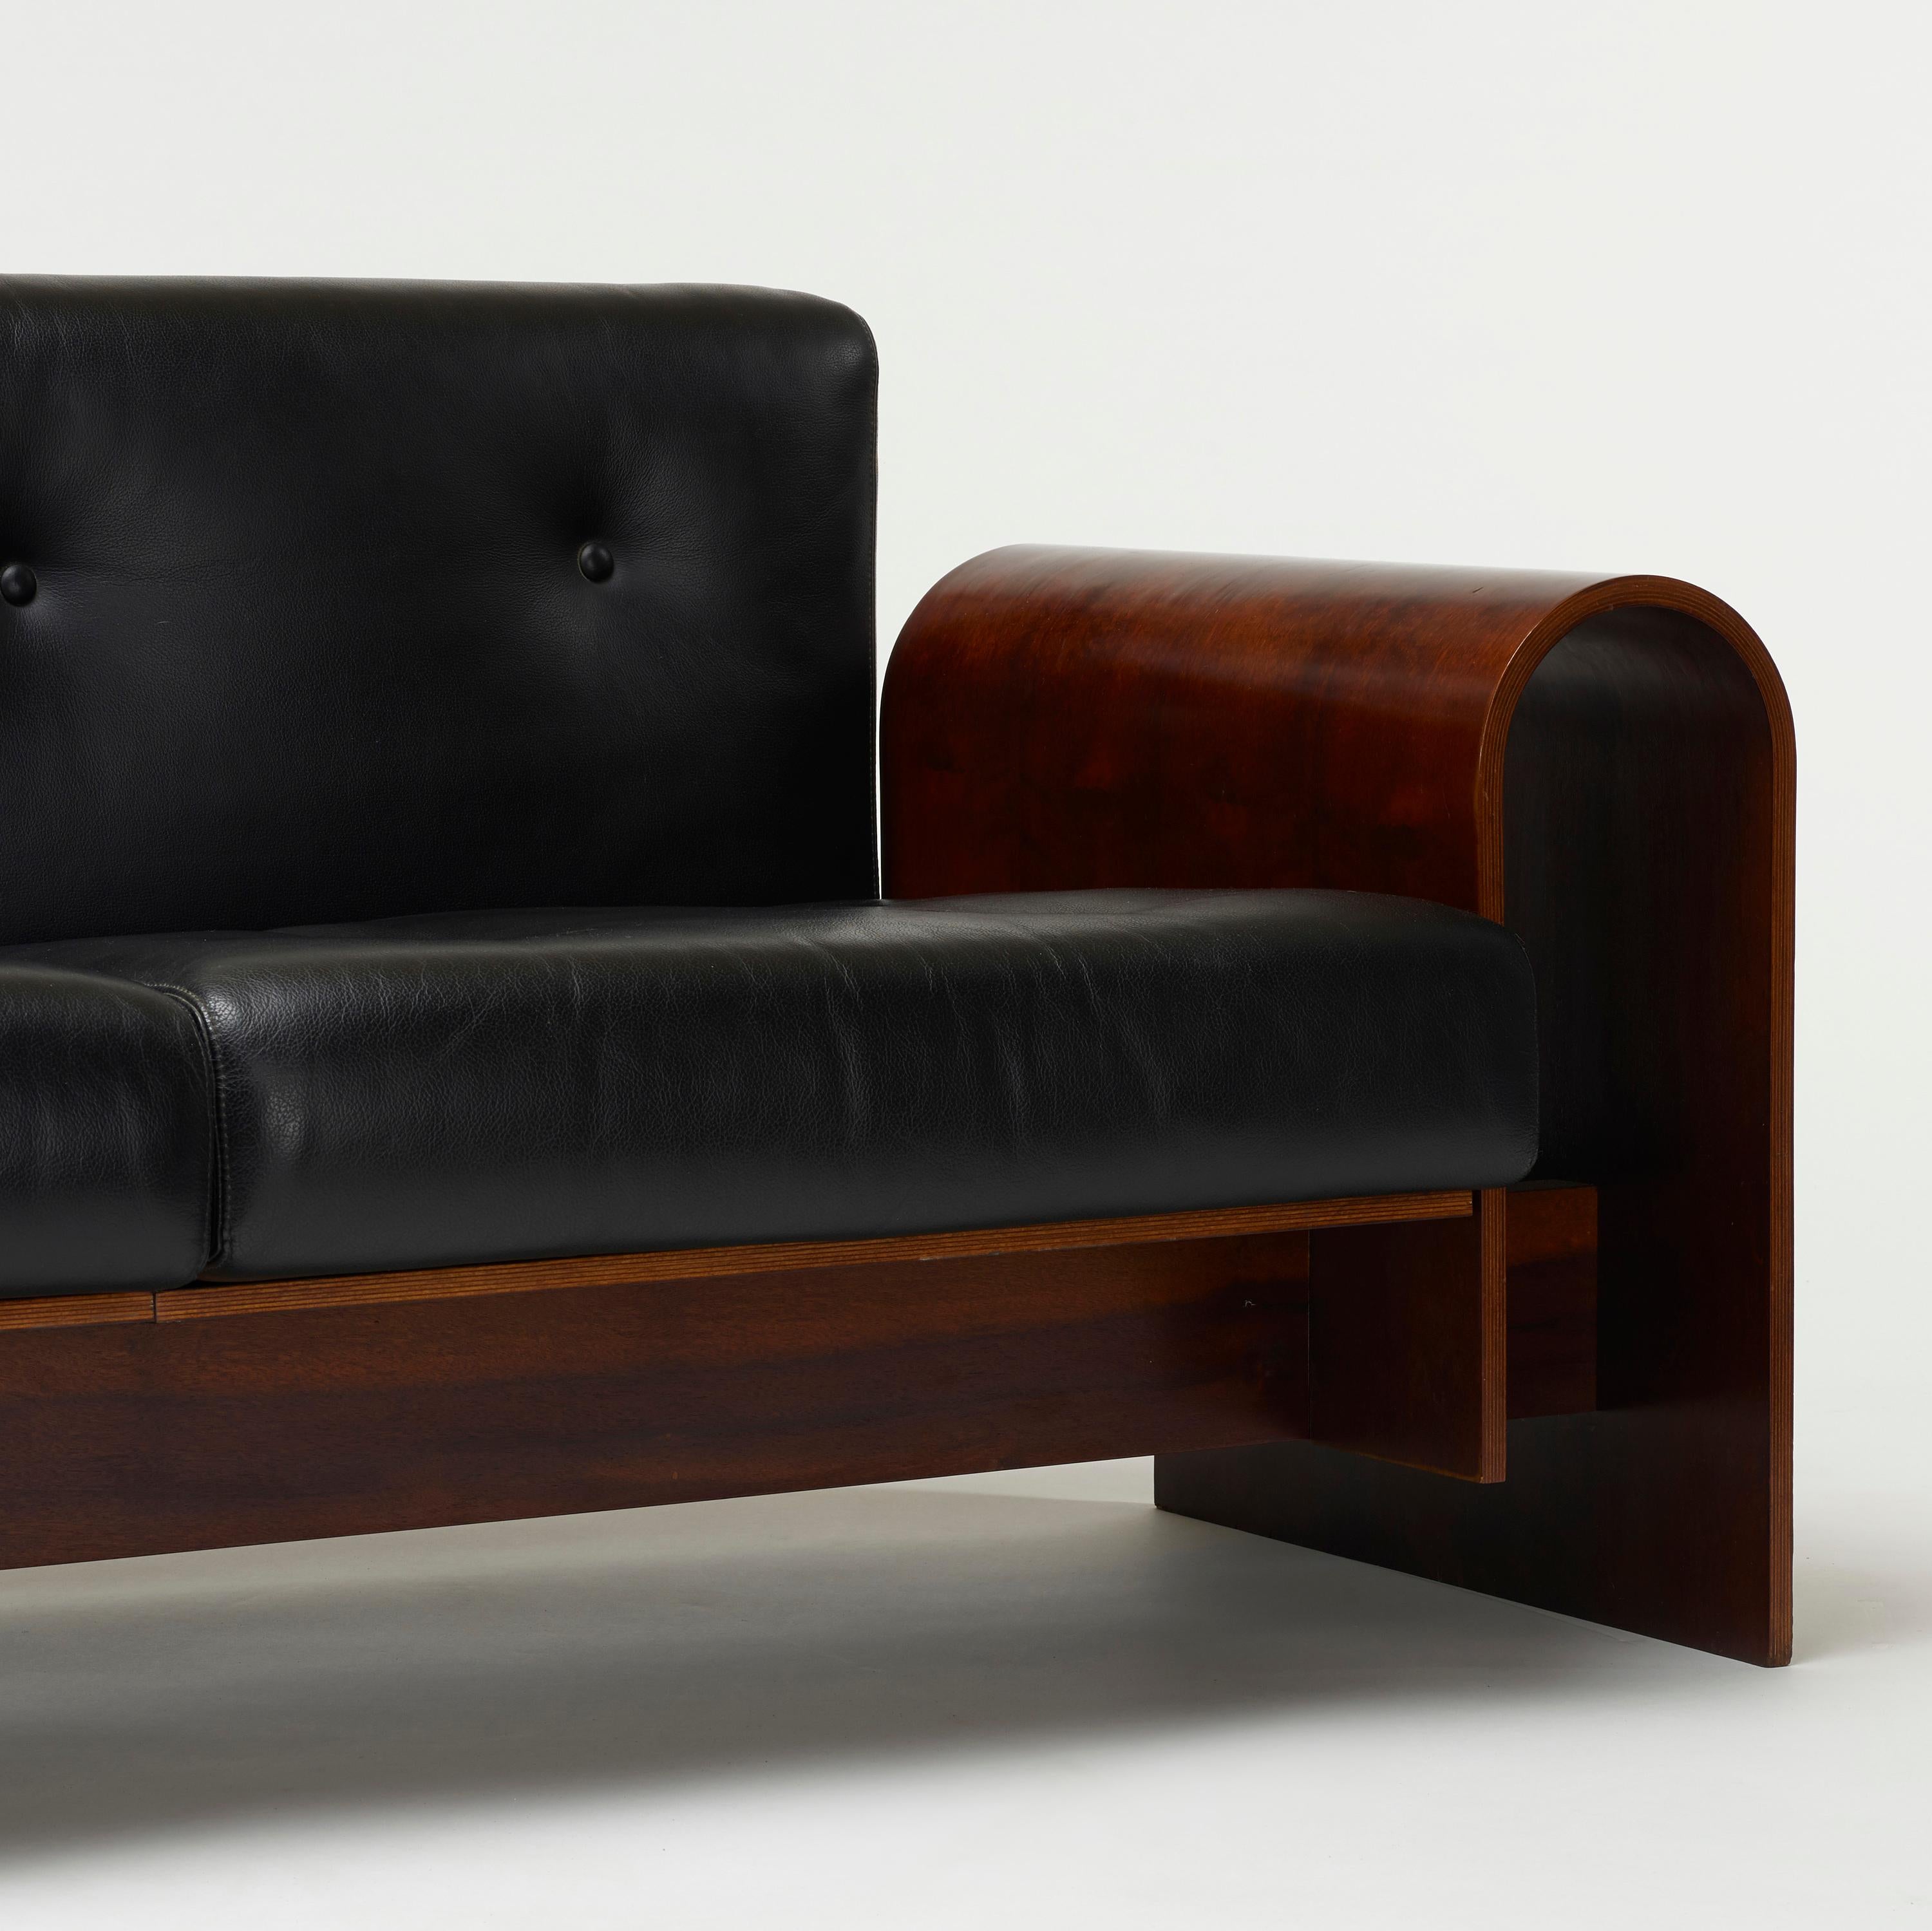 Mid-Century Modern Oscar Niemeyer Exceptional Sofa in Rosewood and Leather, Hotel SESC, Brazil 1990